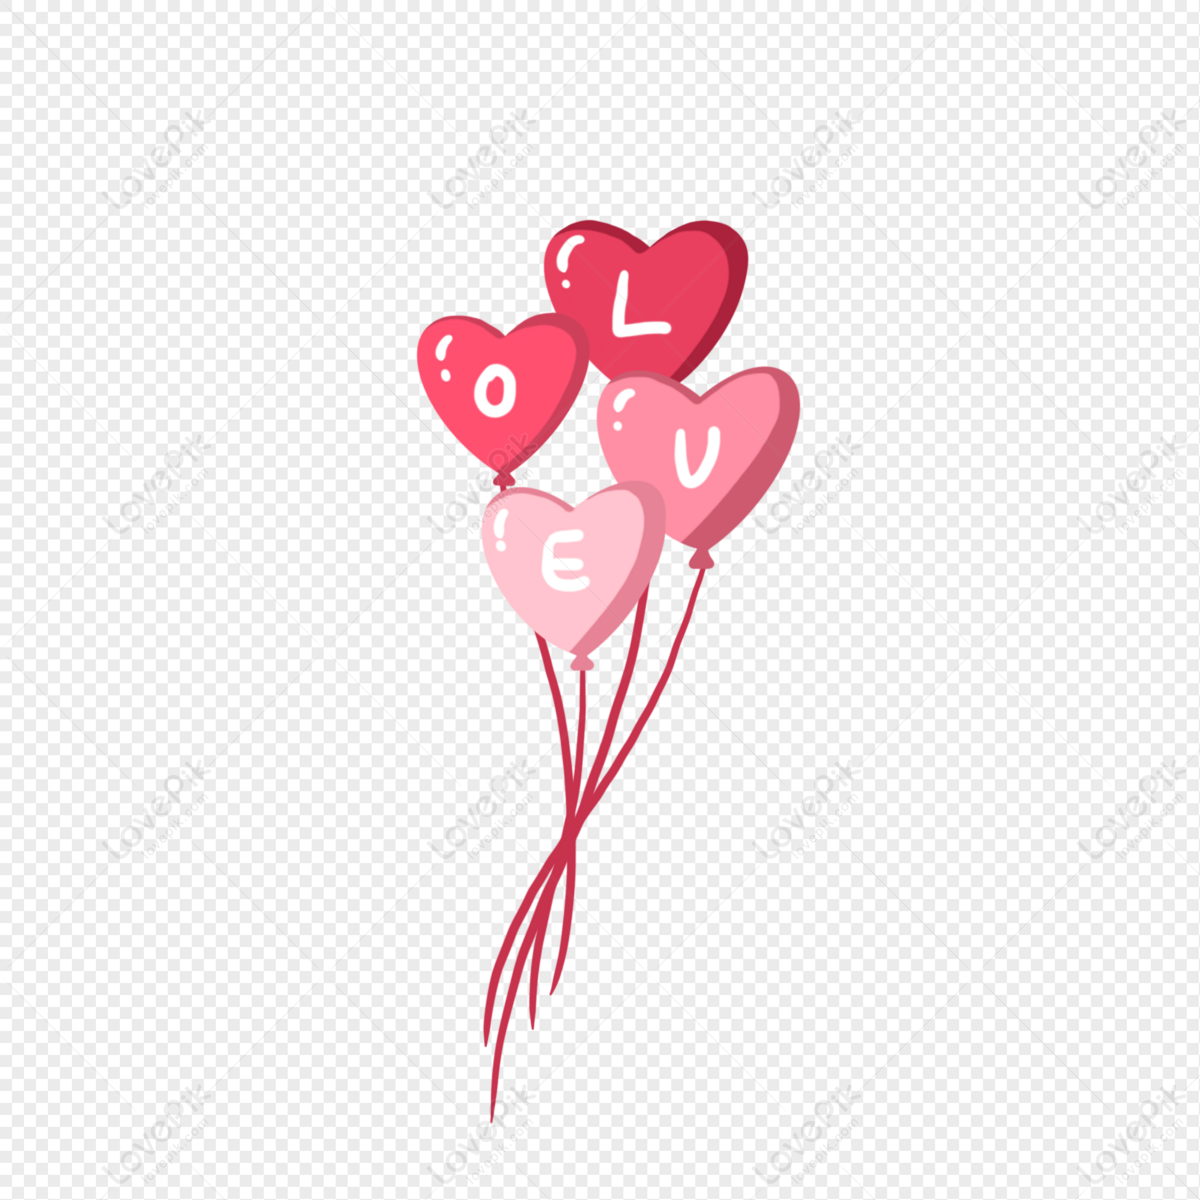 Cartoon Hand Drawn Romantic Heart Shaped Letter Balloon PNG Free ...